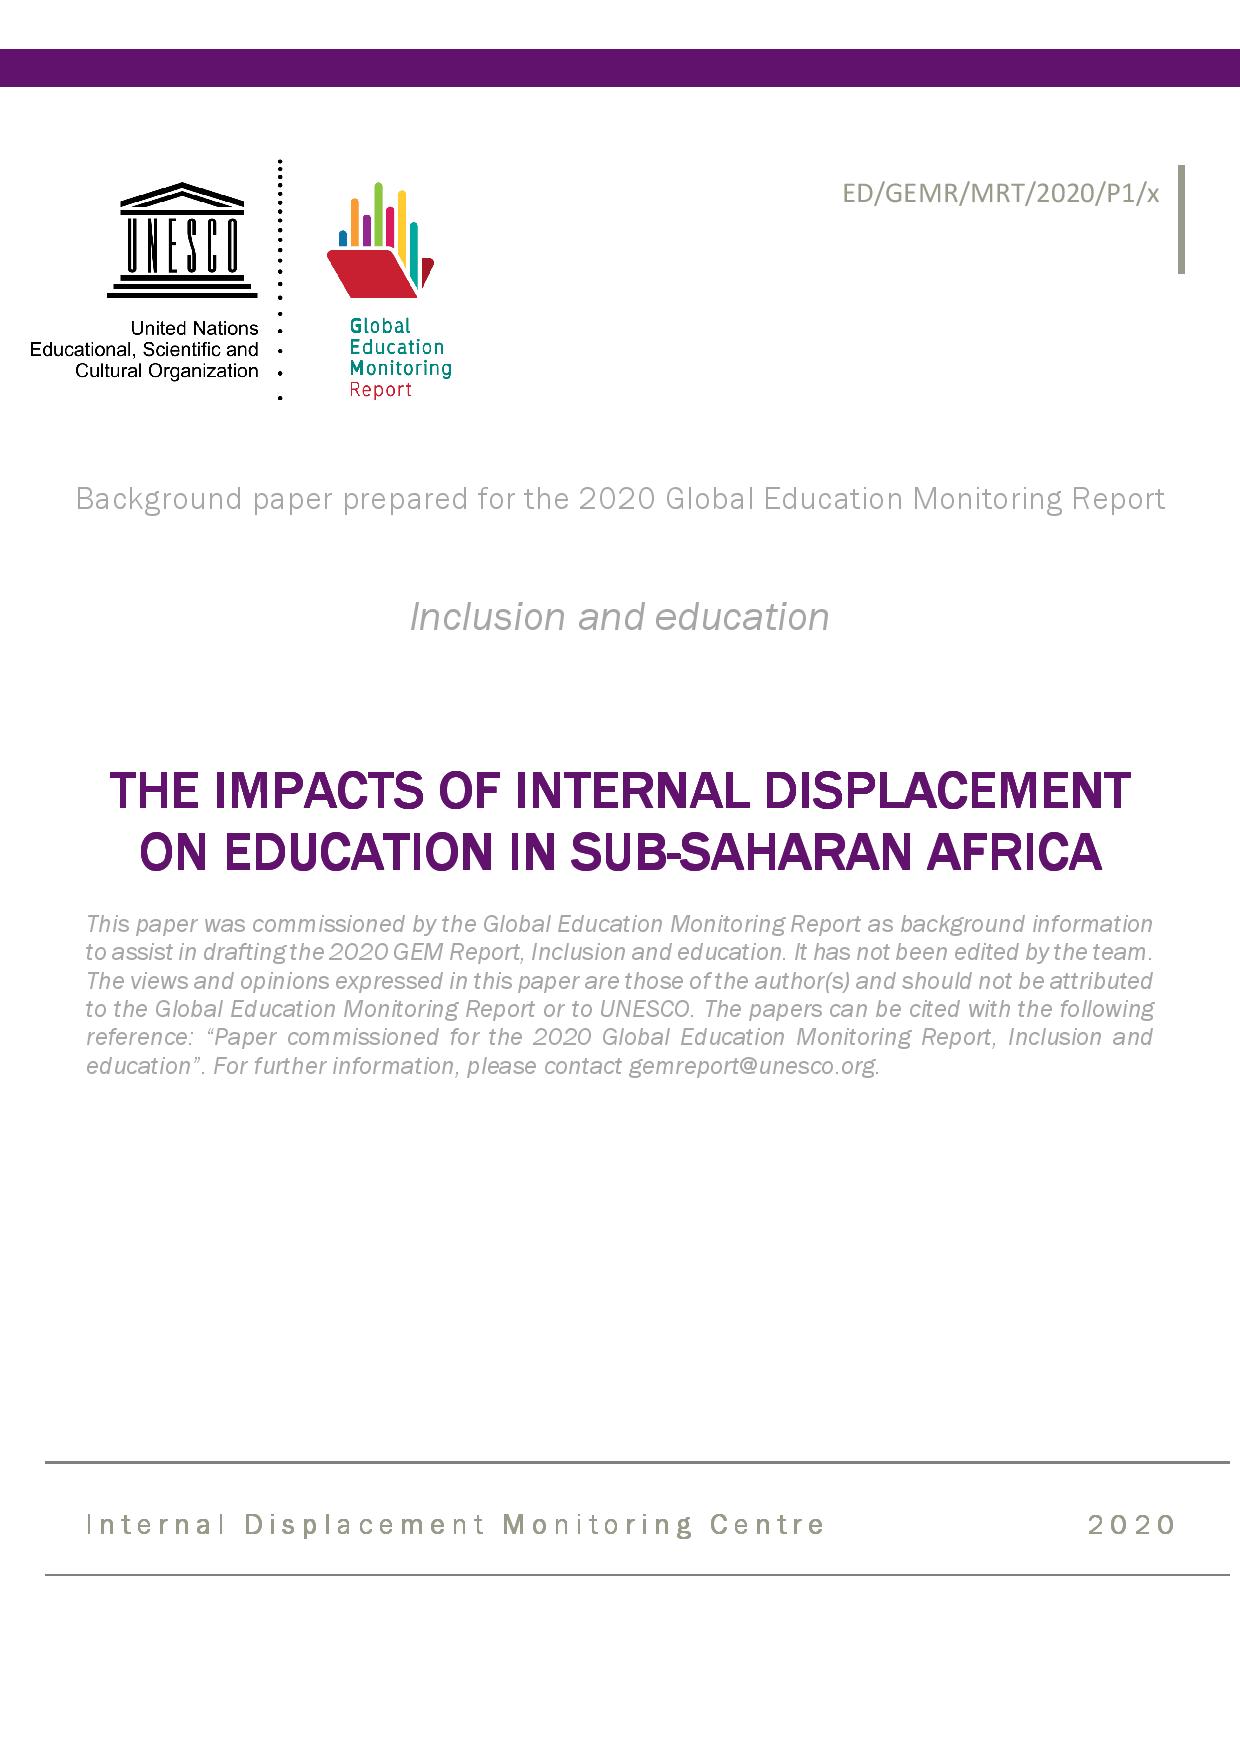 The impacts of internal displacement on education in sub-Saharan Africa